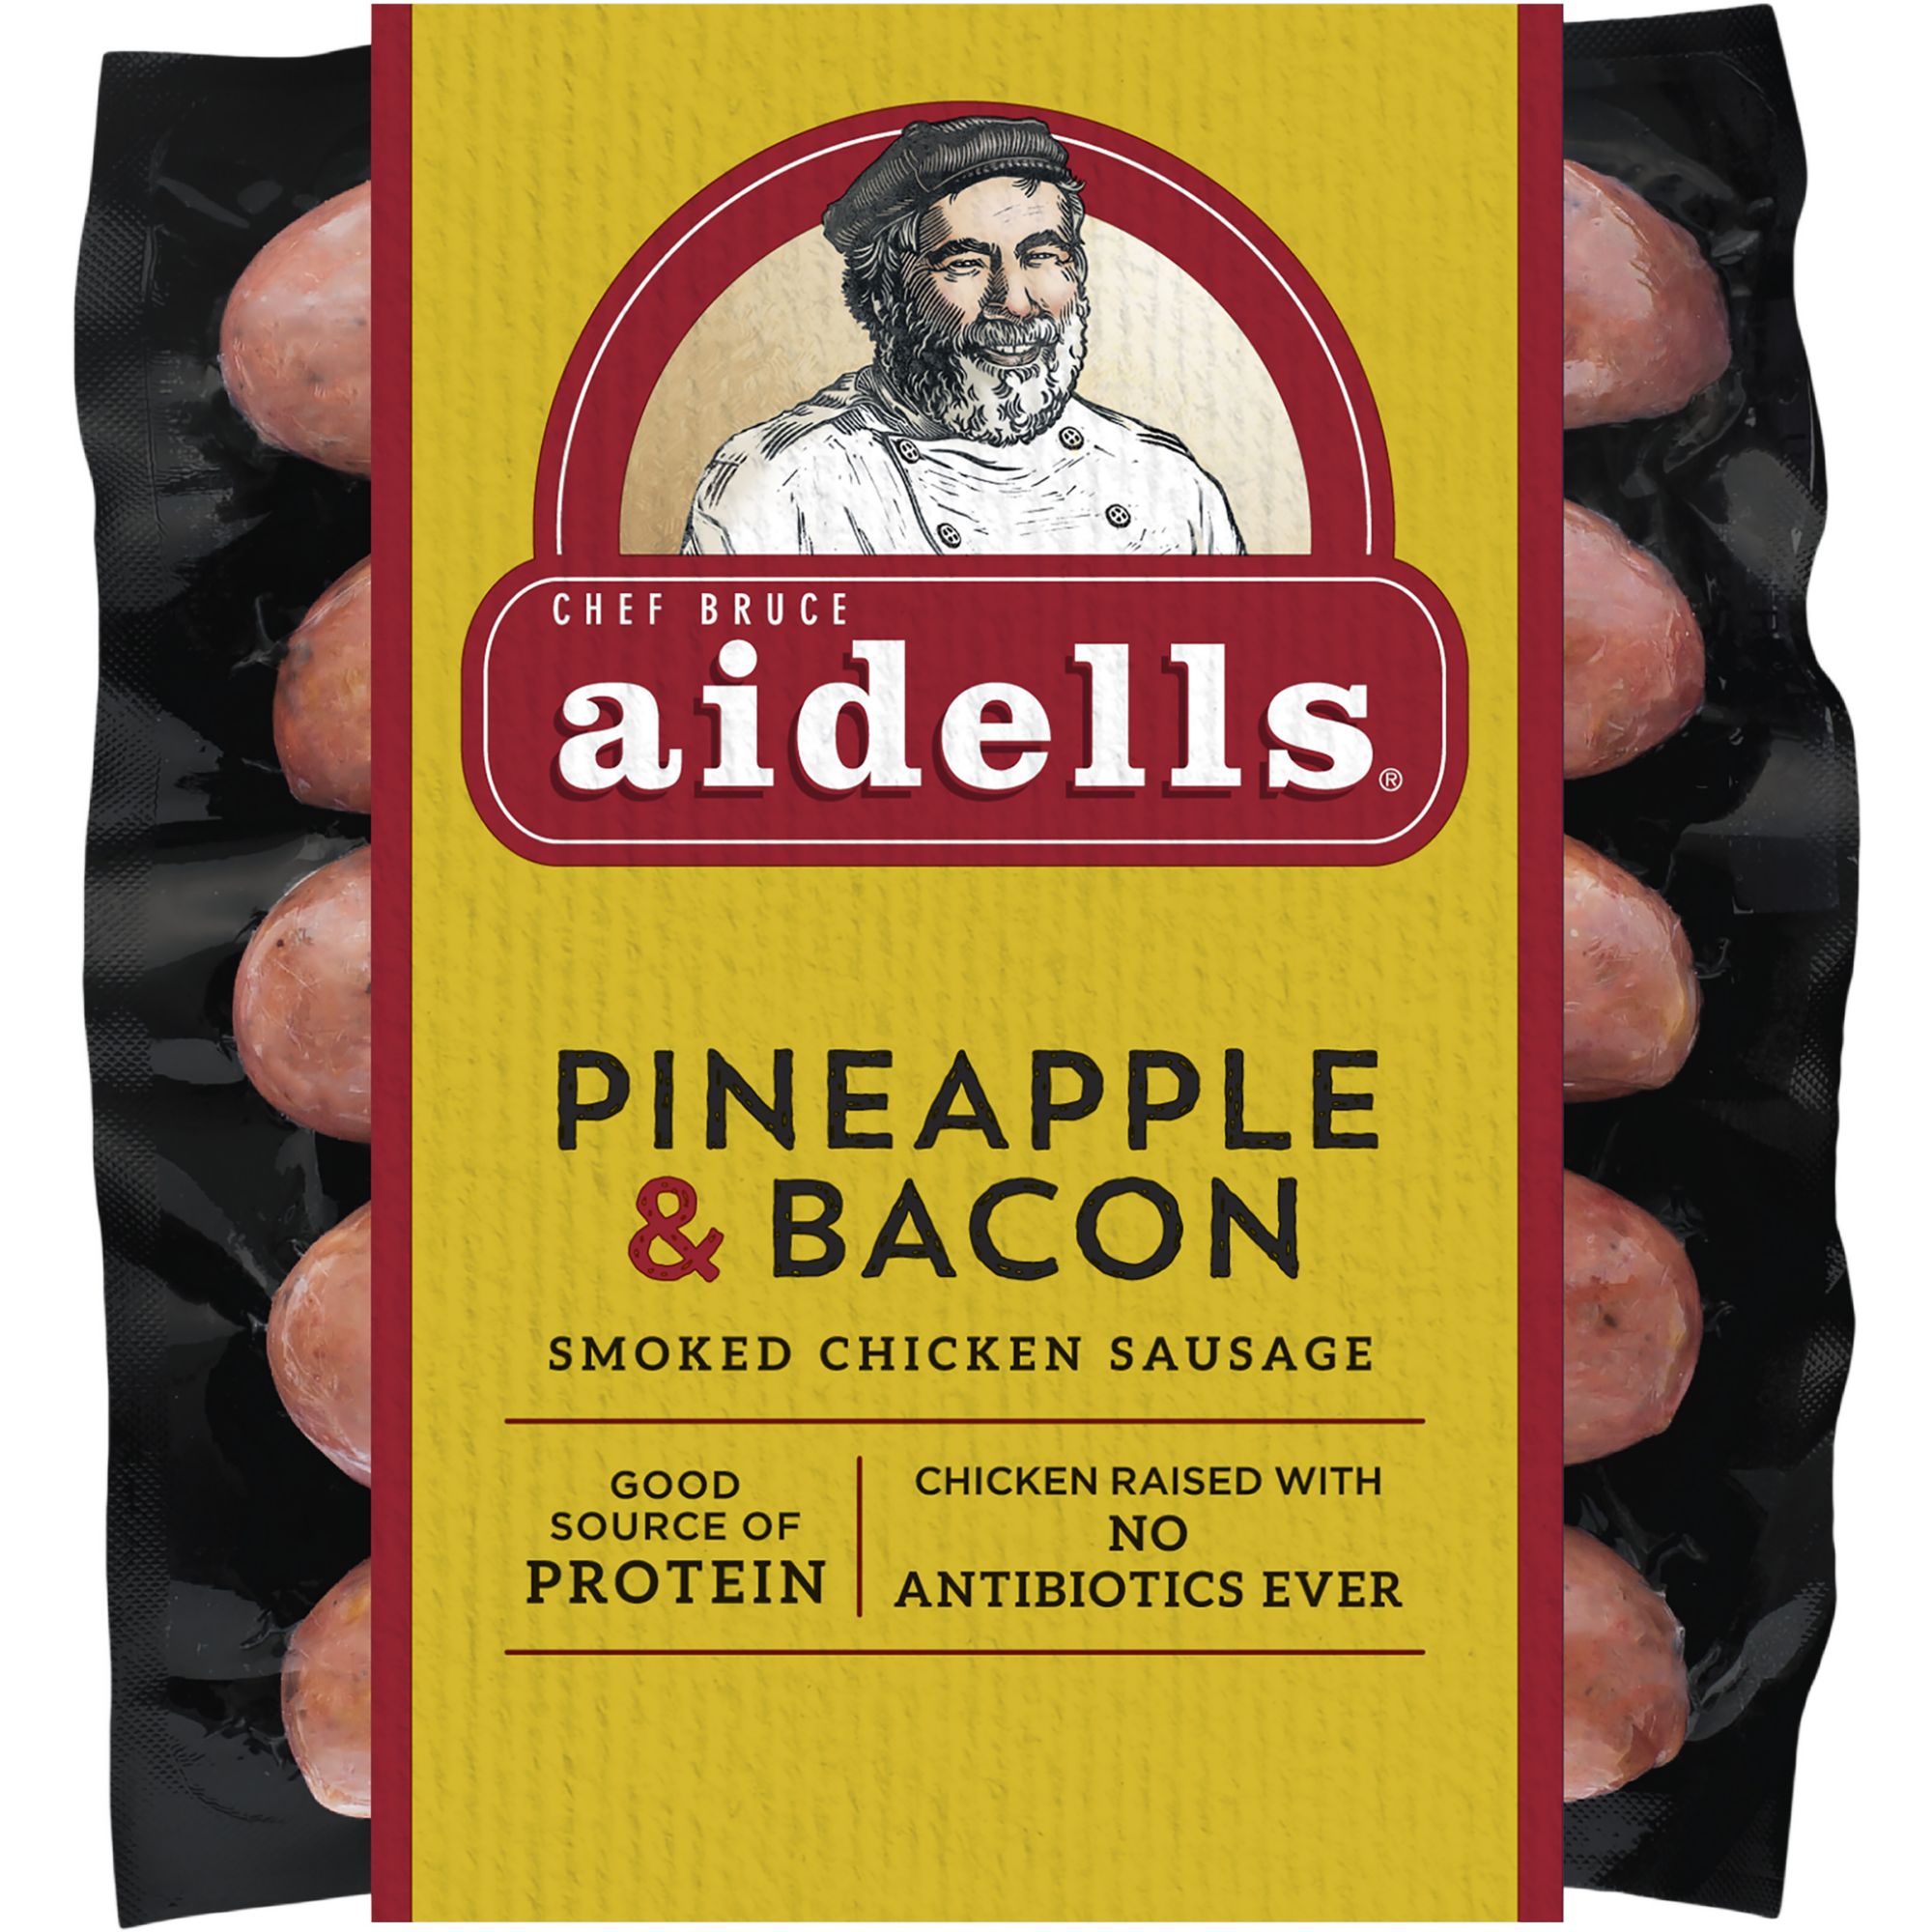 Aidells Pineapple & Bacon Smoked Chicken Sausage, 32 oz.